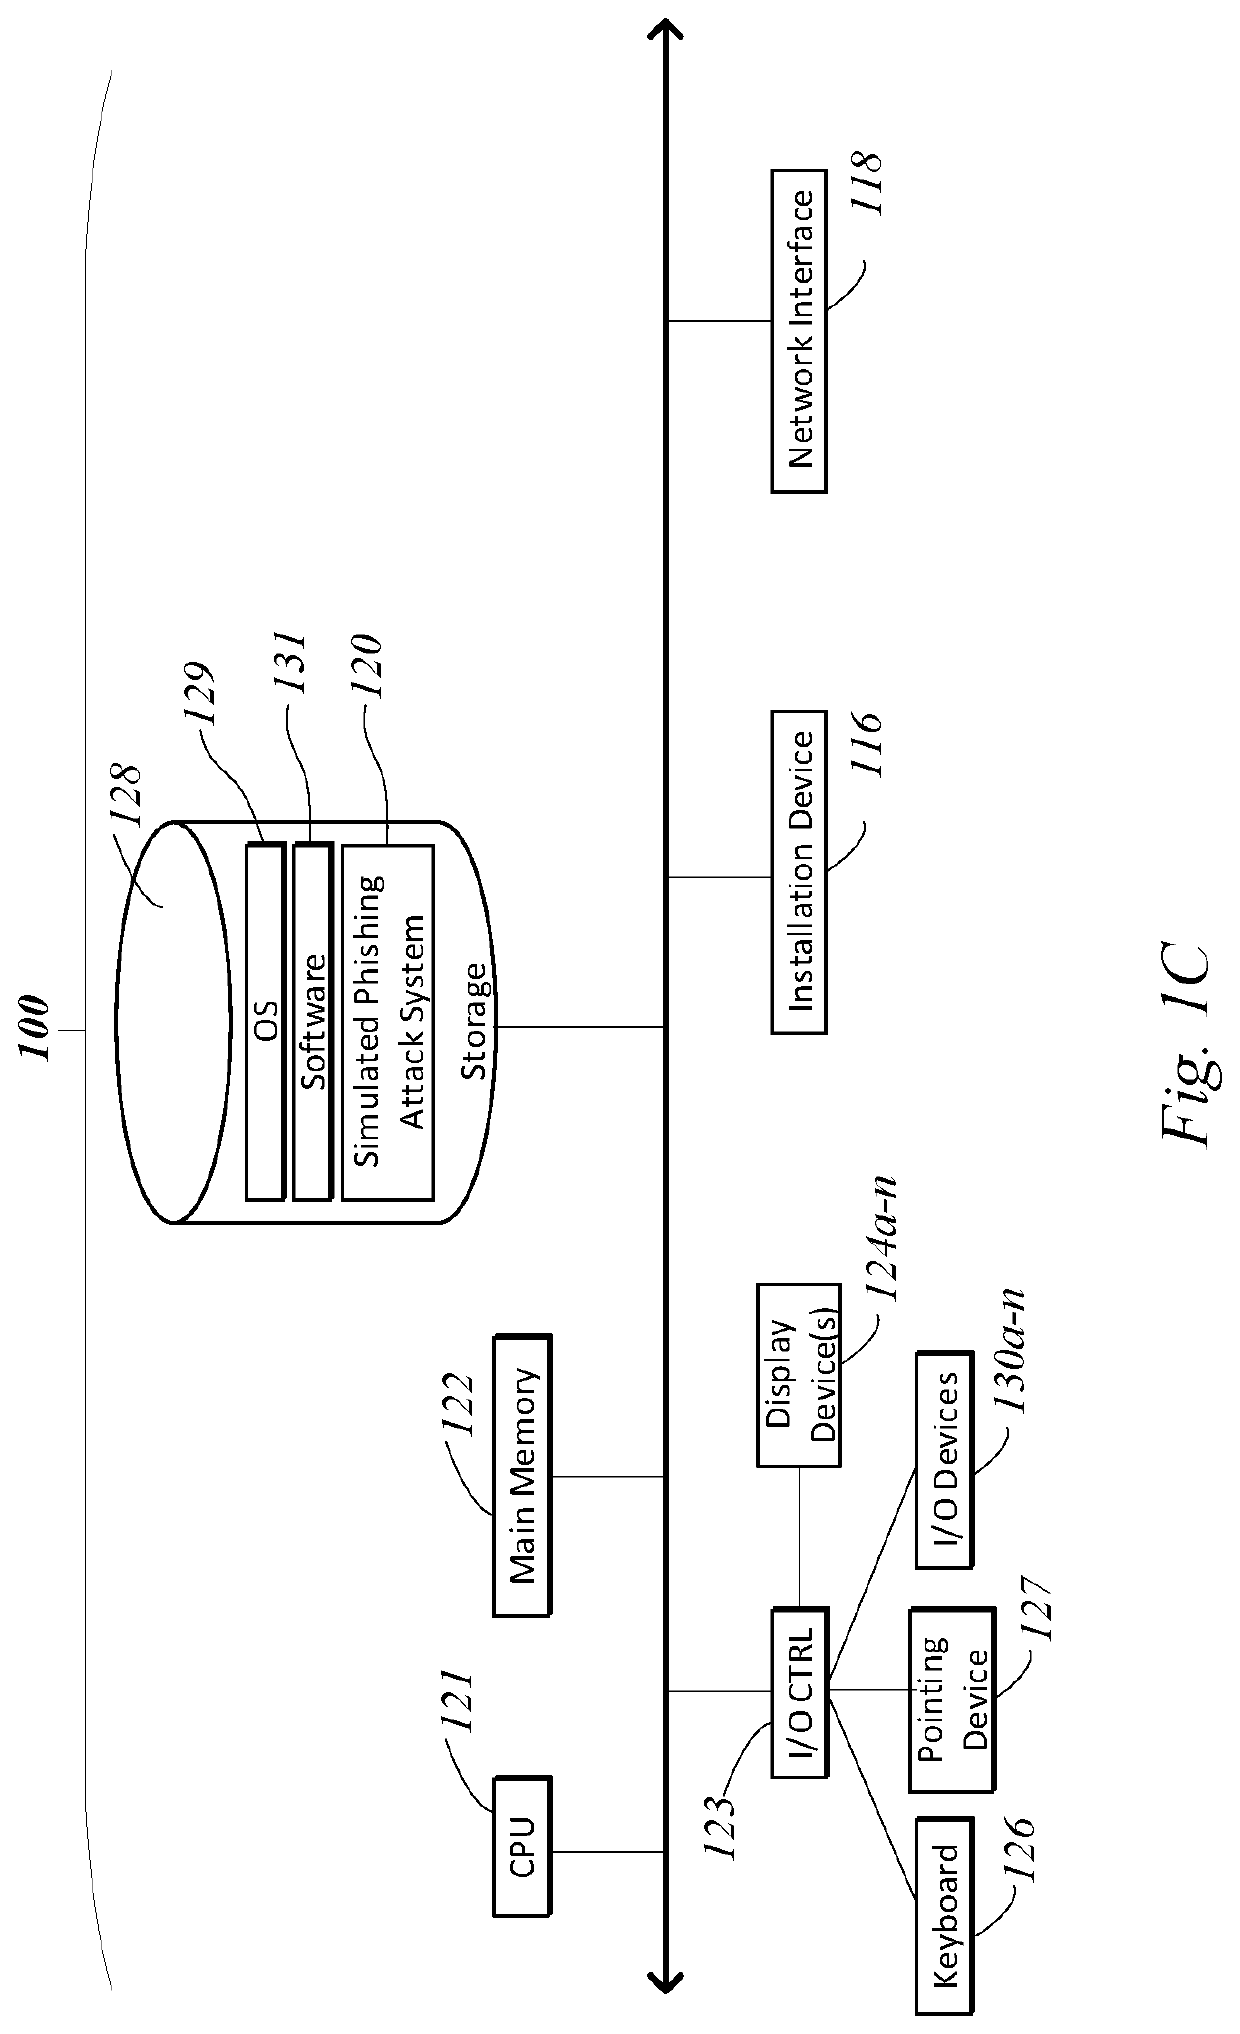 System and methods for minimizing organization risk from users associated with a password breach